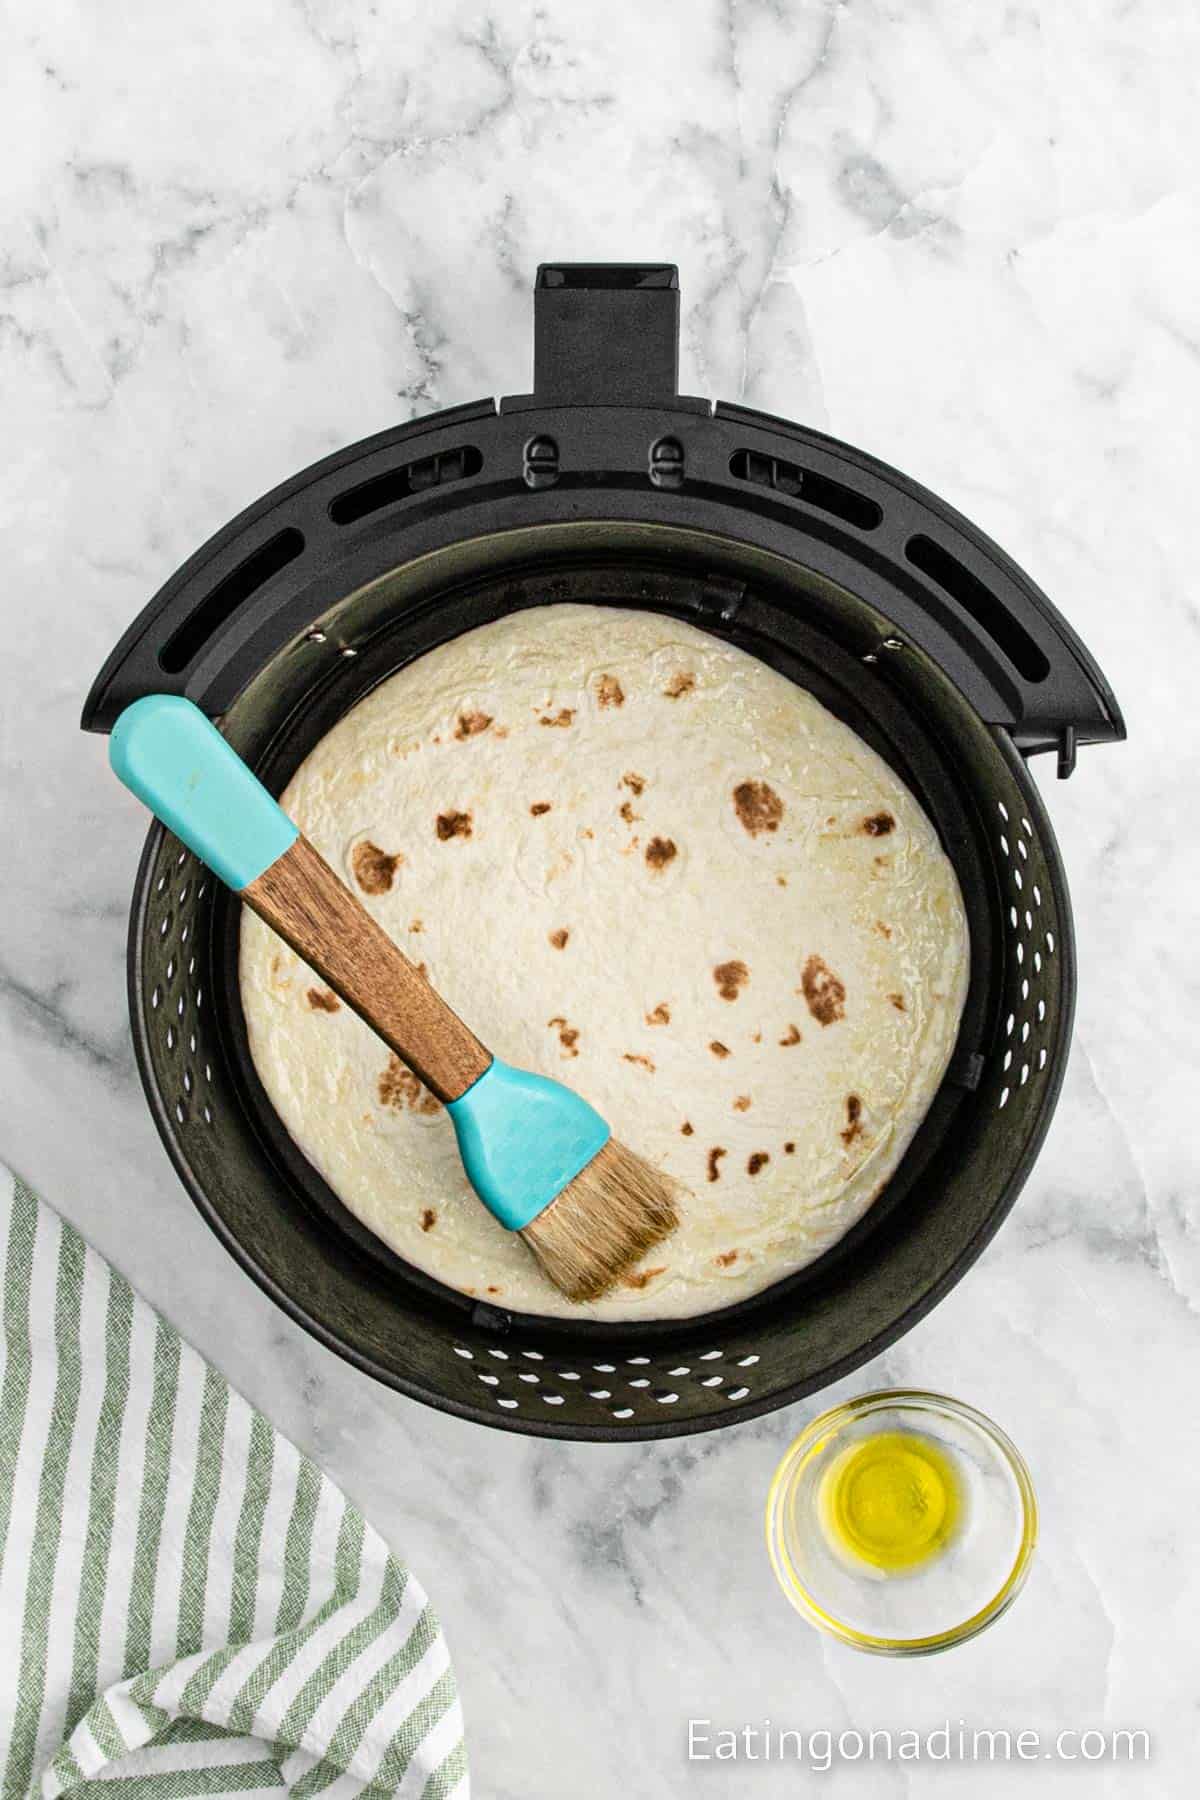 Placing tortilla in the air fryer basket and brush oil over the tortilla